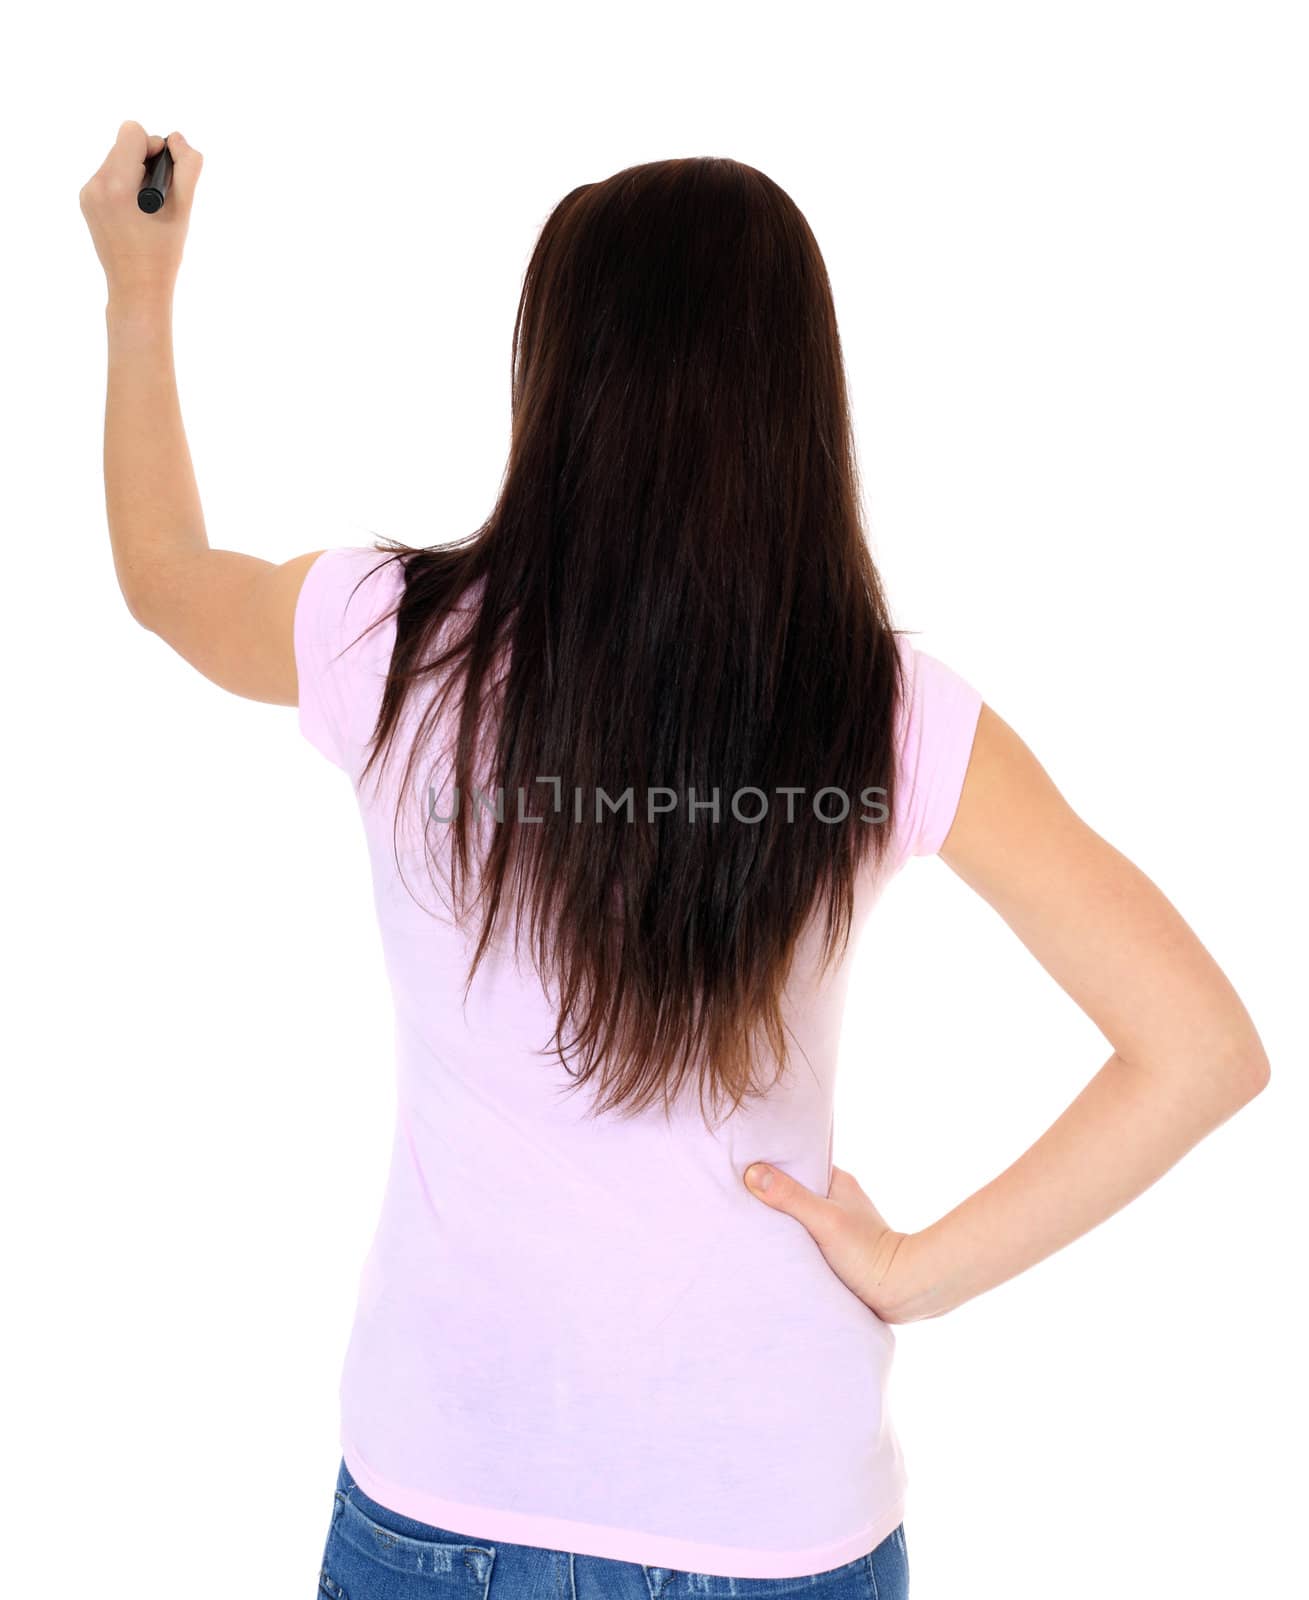 Attractive teenage girl using black marker. All on white background.